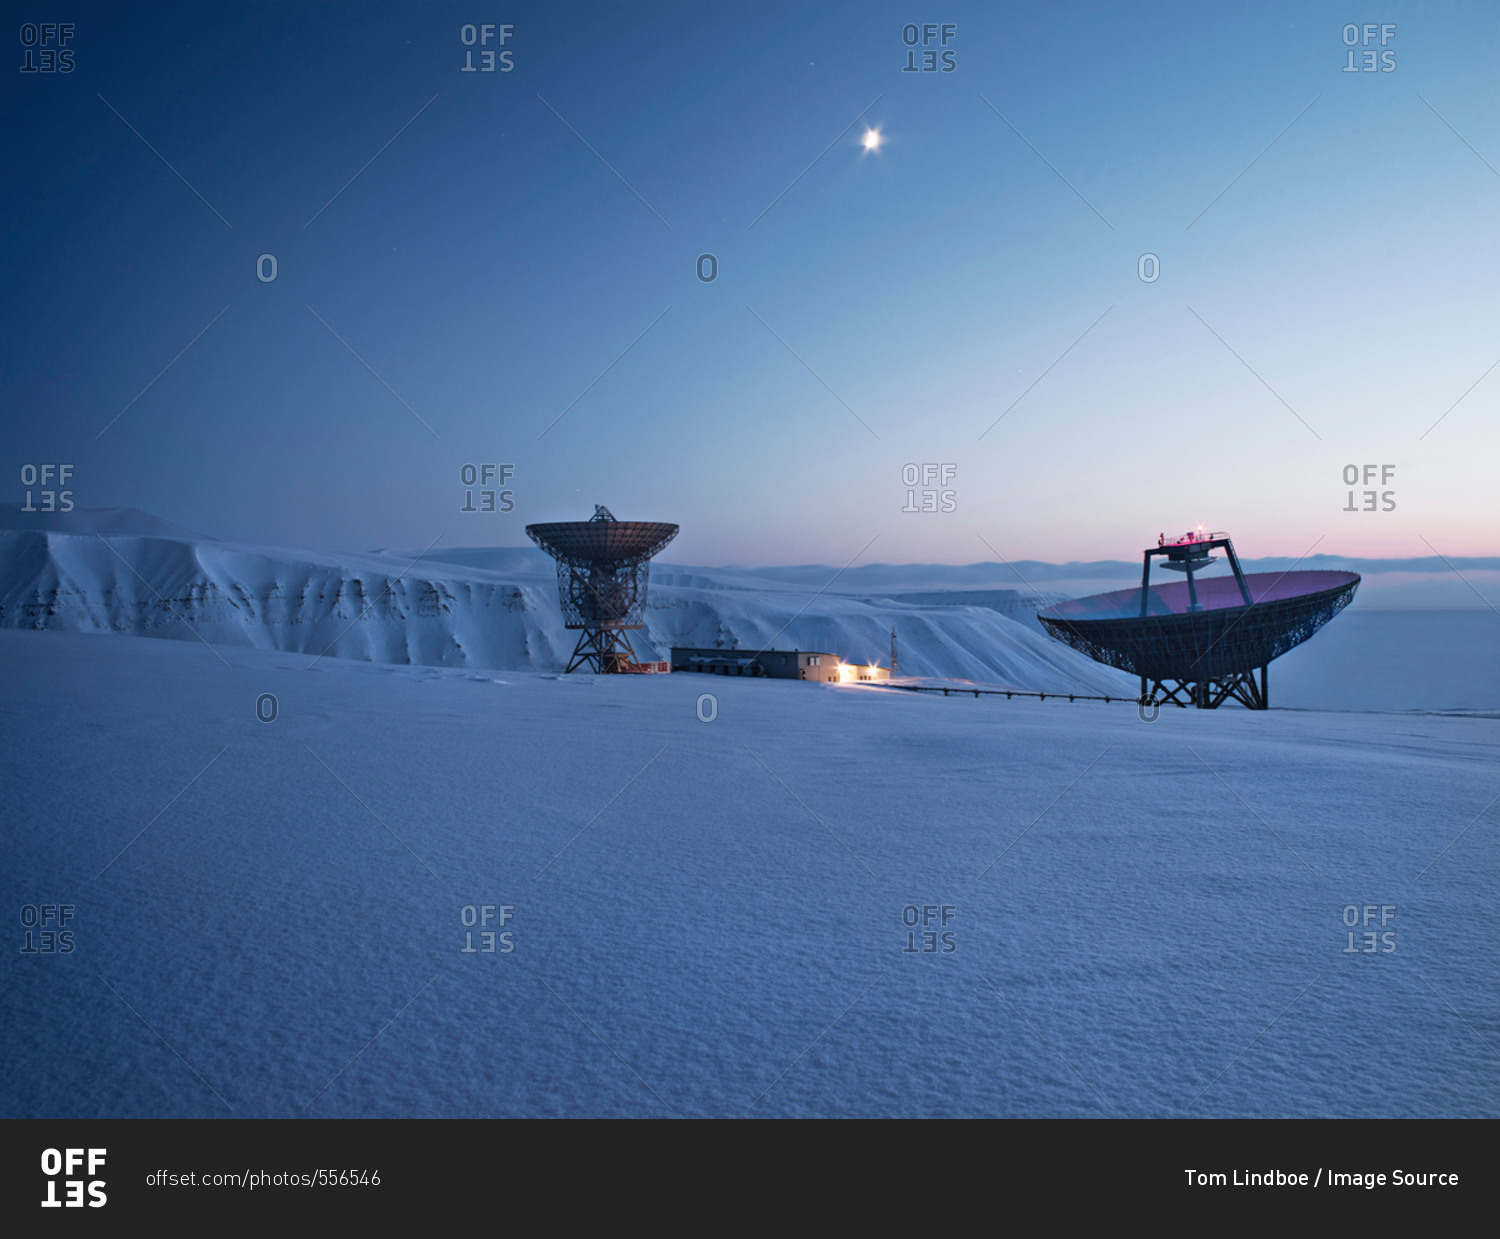 Satellite dishes in snowy landscape